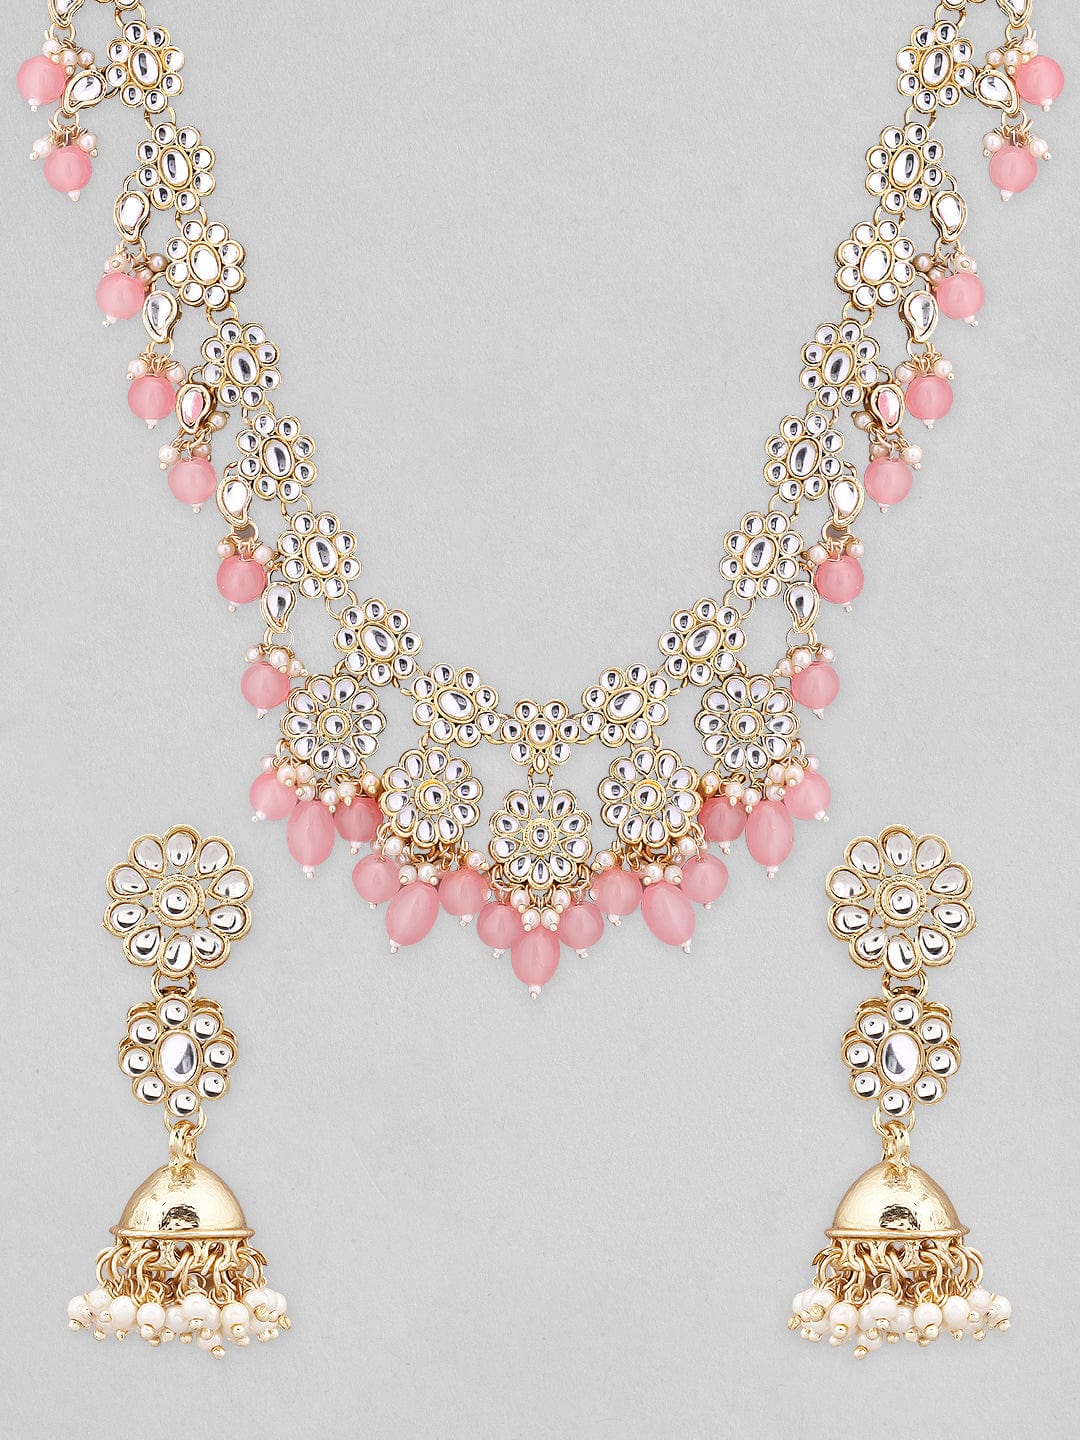 Rubans 22K Gold Plated Necklace Set With American Diamonds And Pink Stones. Necklace Set